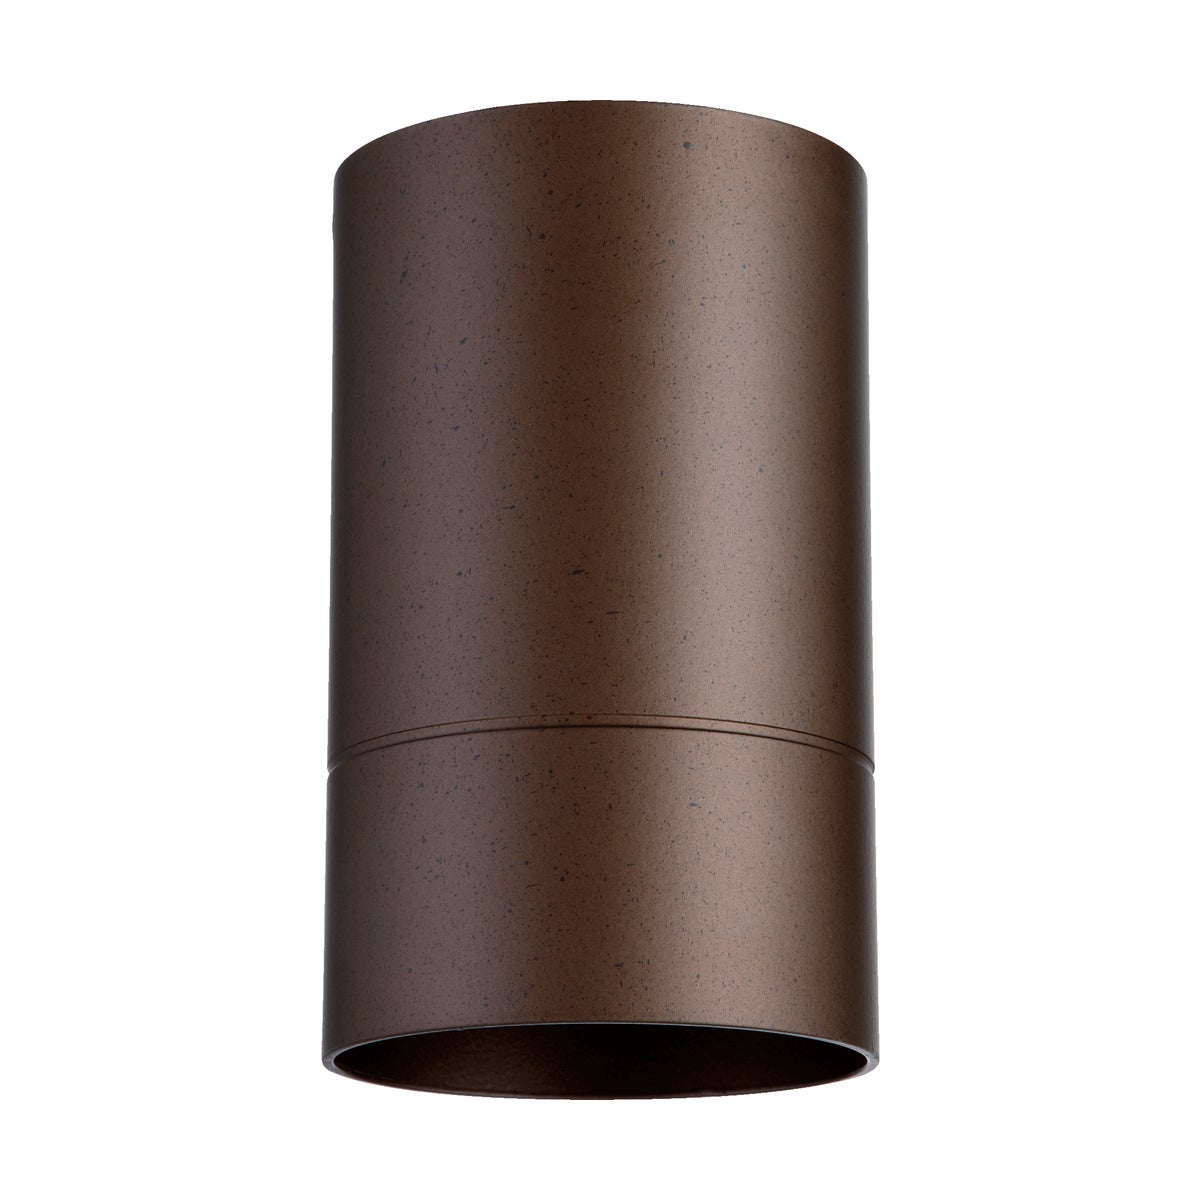 Cylinder 7" Ceiling Mount Oiled Bronze